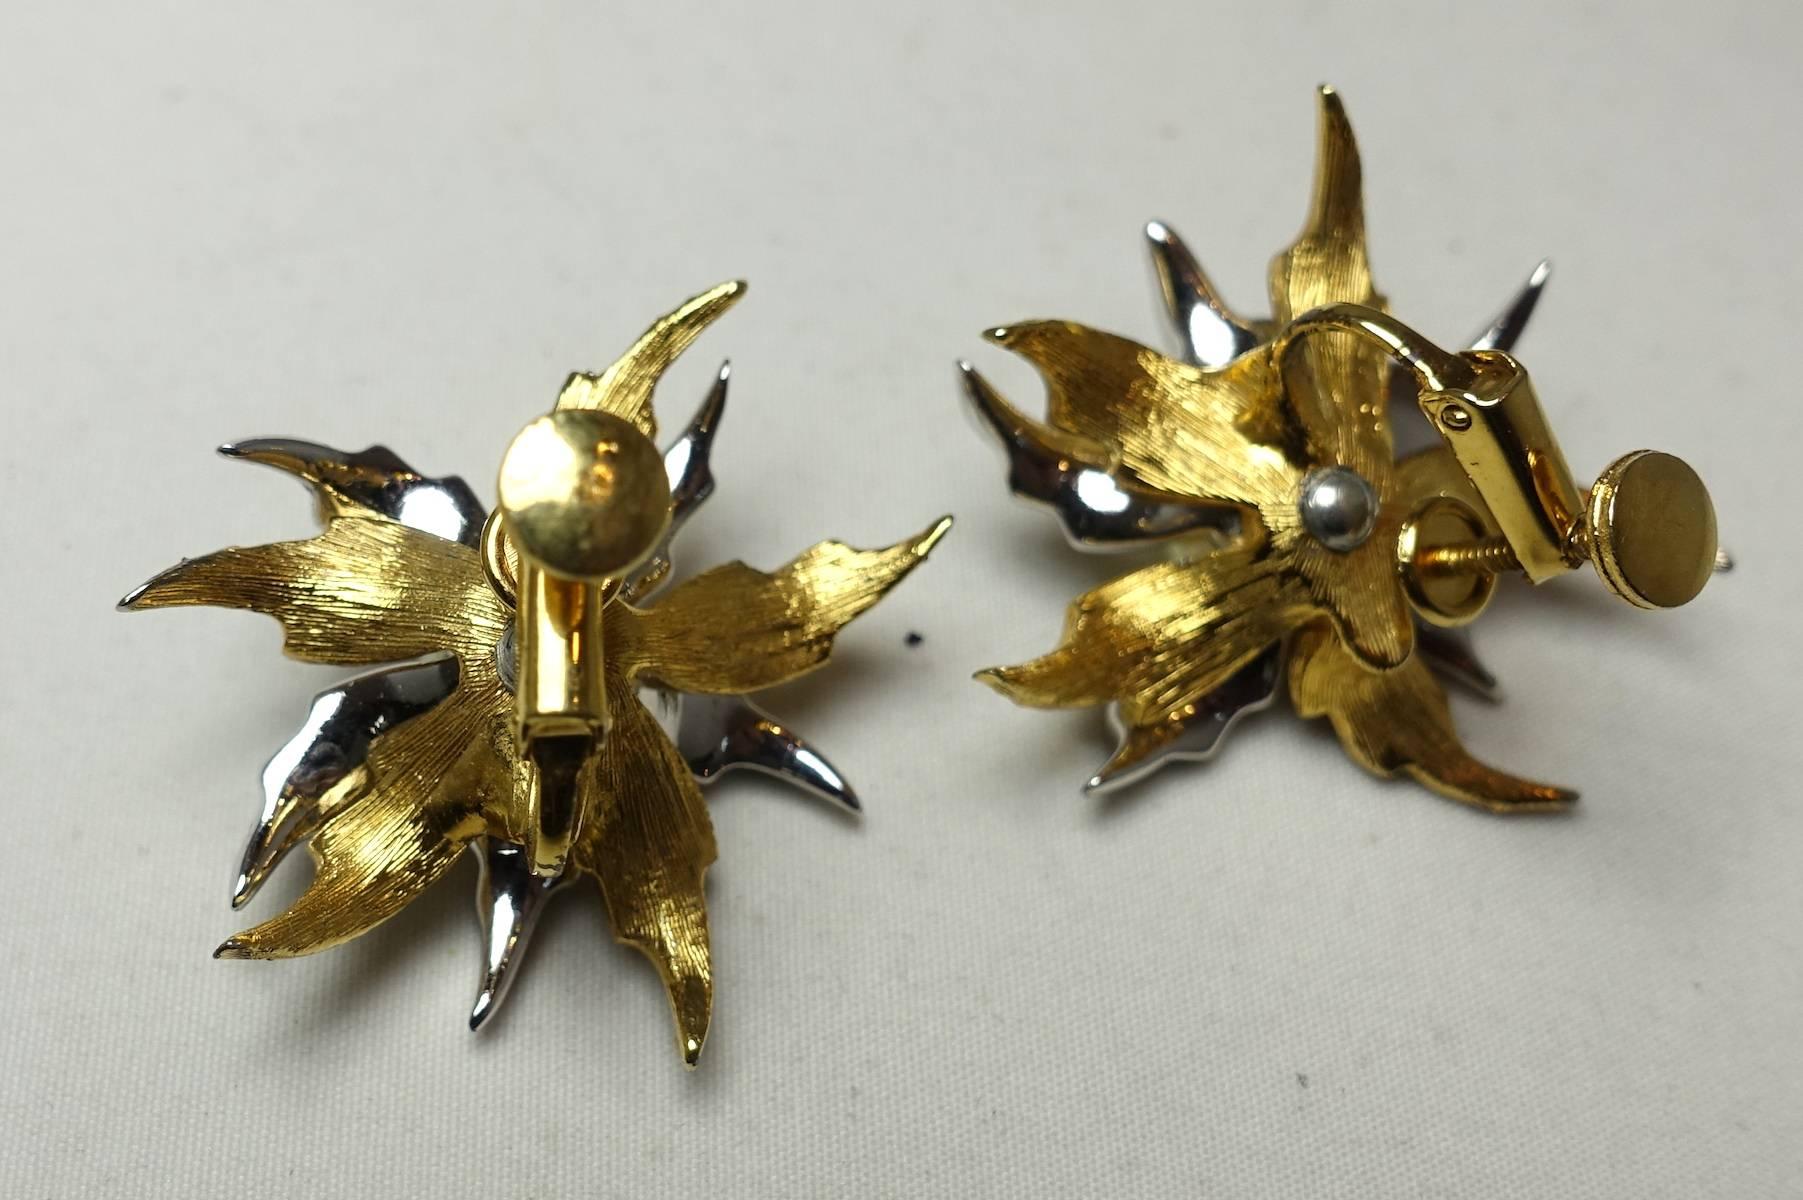 These vintage 1950s Jomaz earrings feature a floral design with faux pearls and clear rhinestone accents in a gold and silver tone mixed-metal setting. These clip earrings measure 1” x 1” are signed “Jomaz”.  They are in excellent condition.